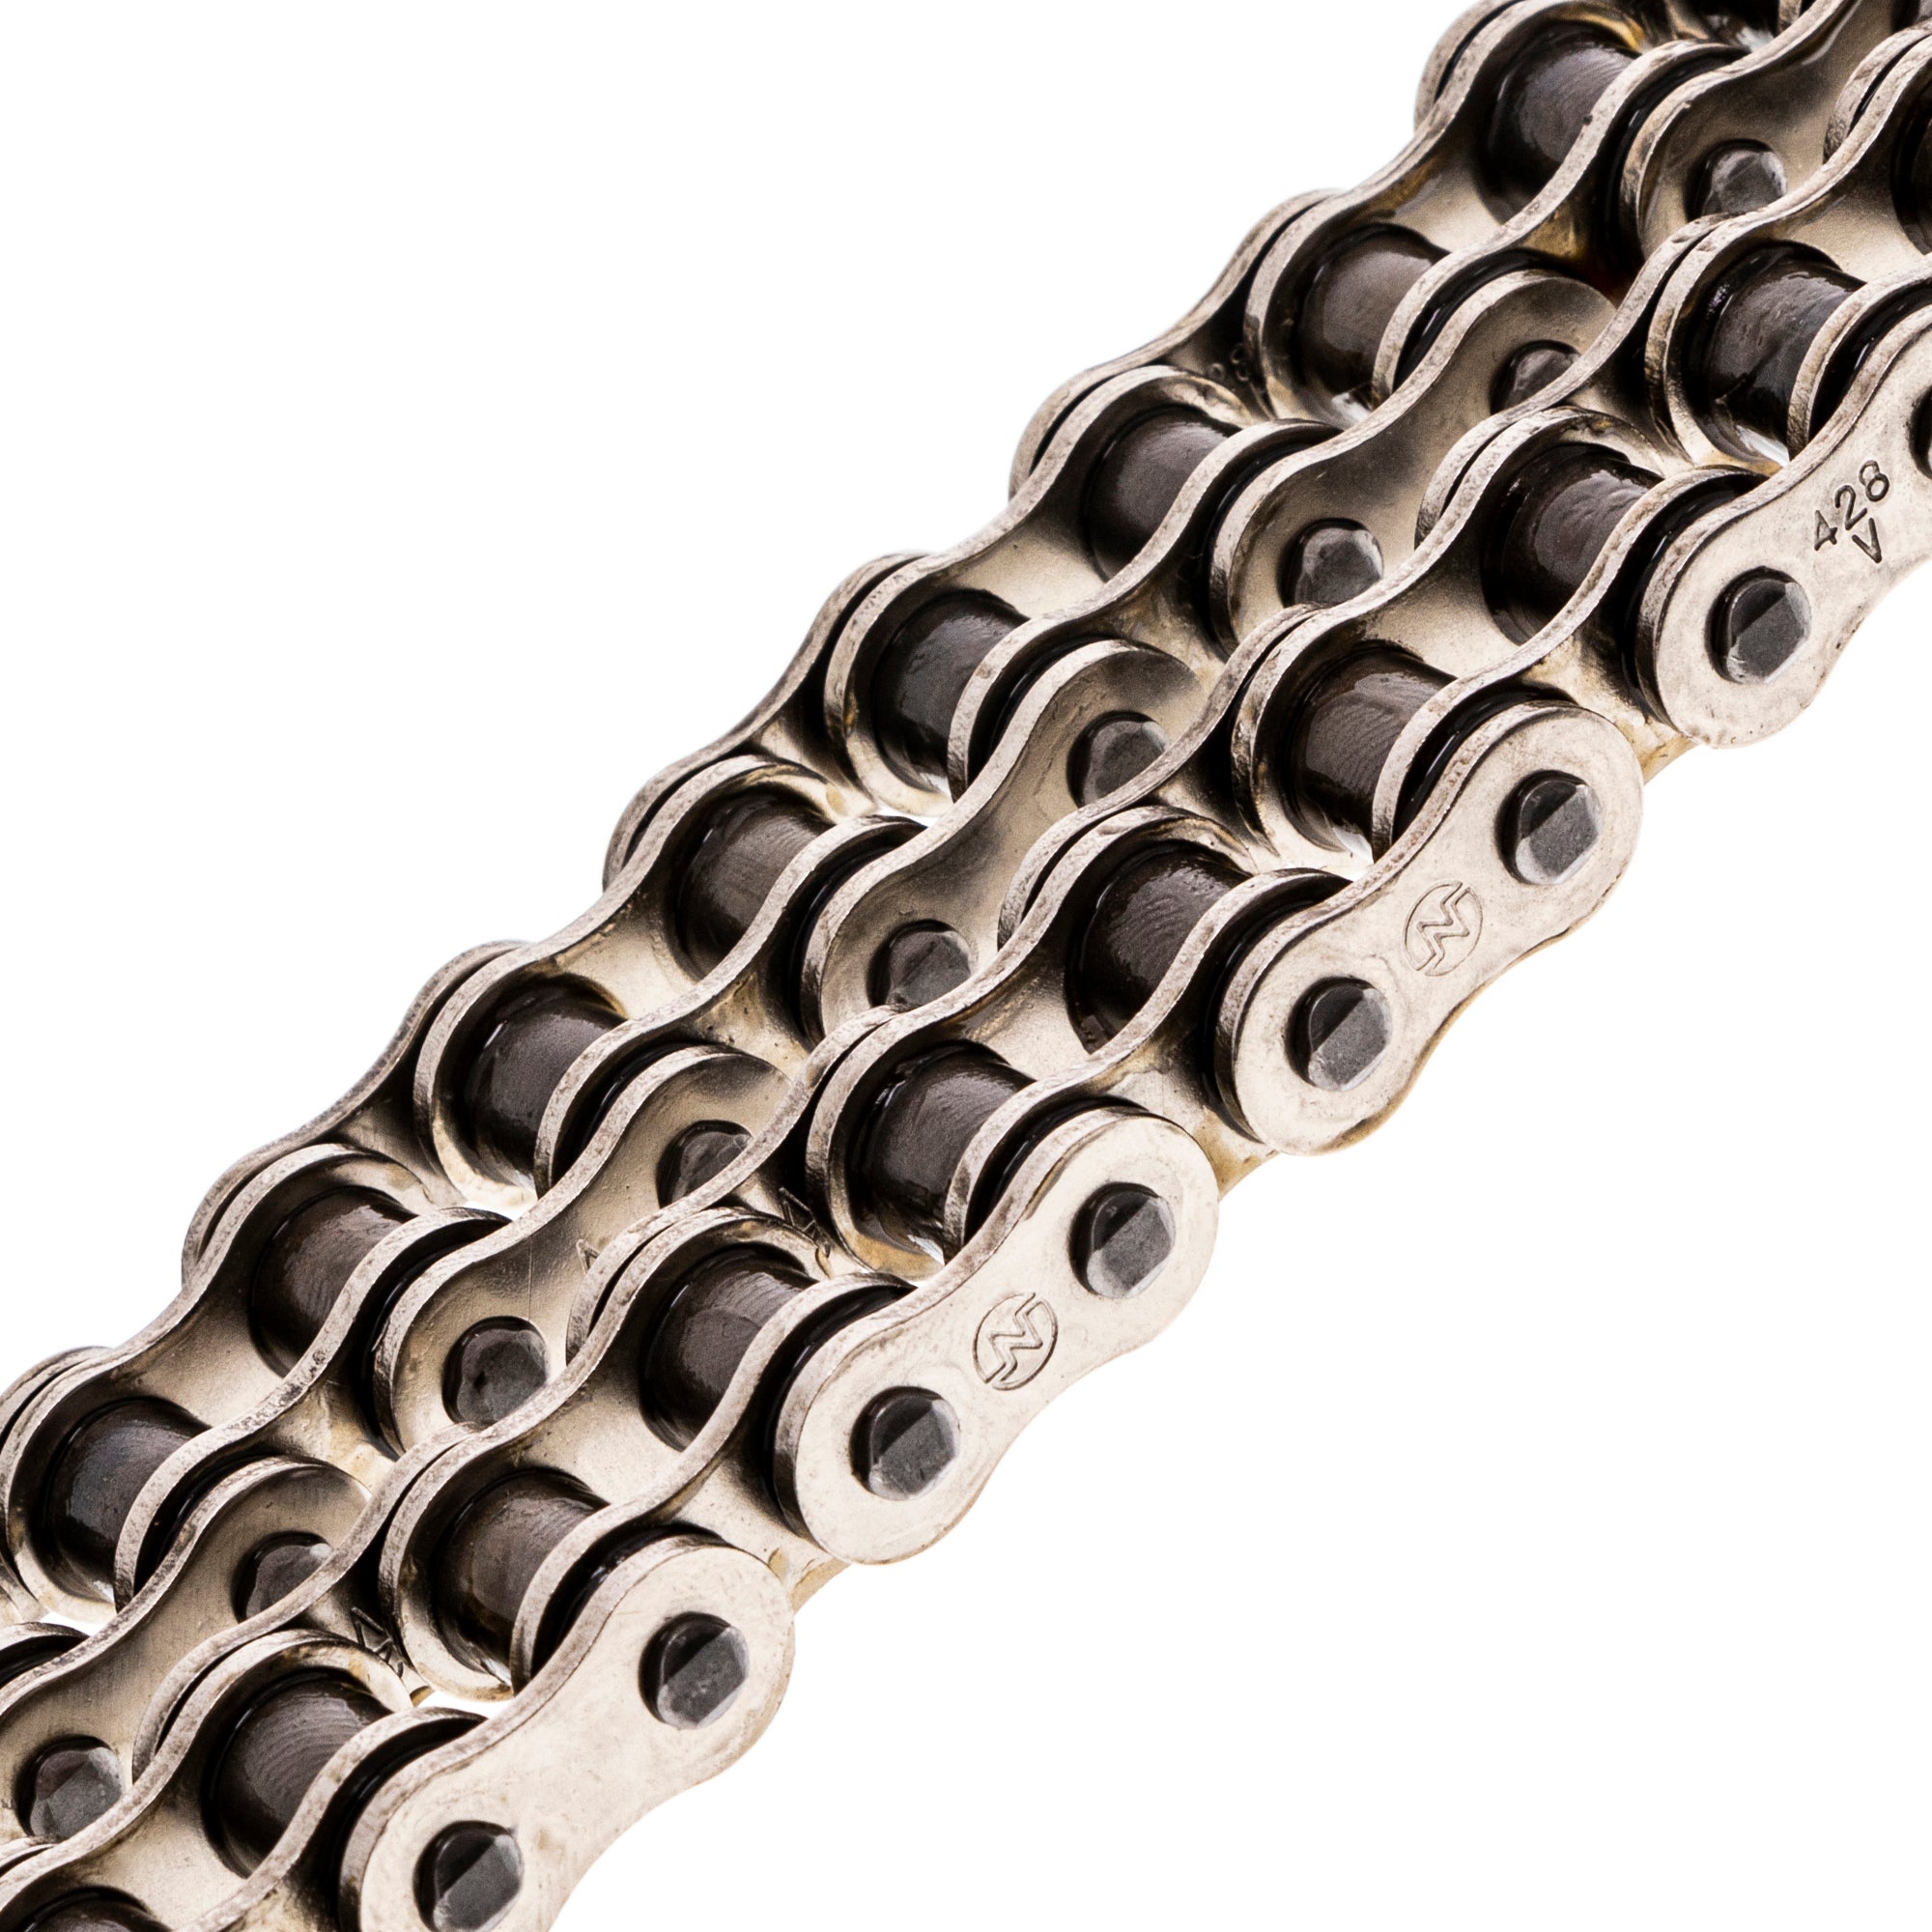 Drive Chain 100 O-Ring w/ Master Link for zOTHER TRX90 SporTrax Mojave KLT110 5297 NICHE 519-CDC2308H